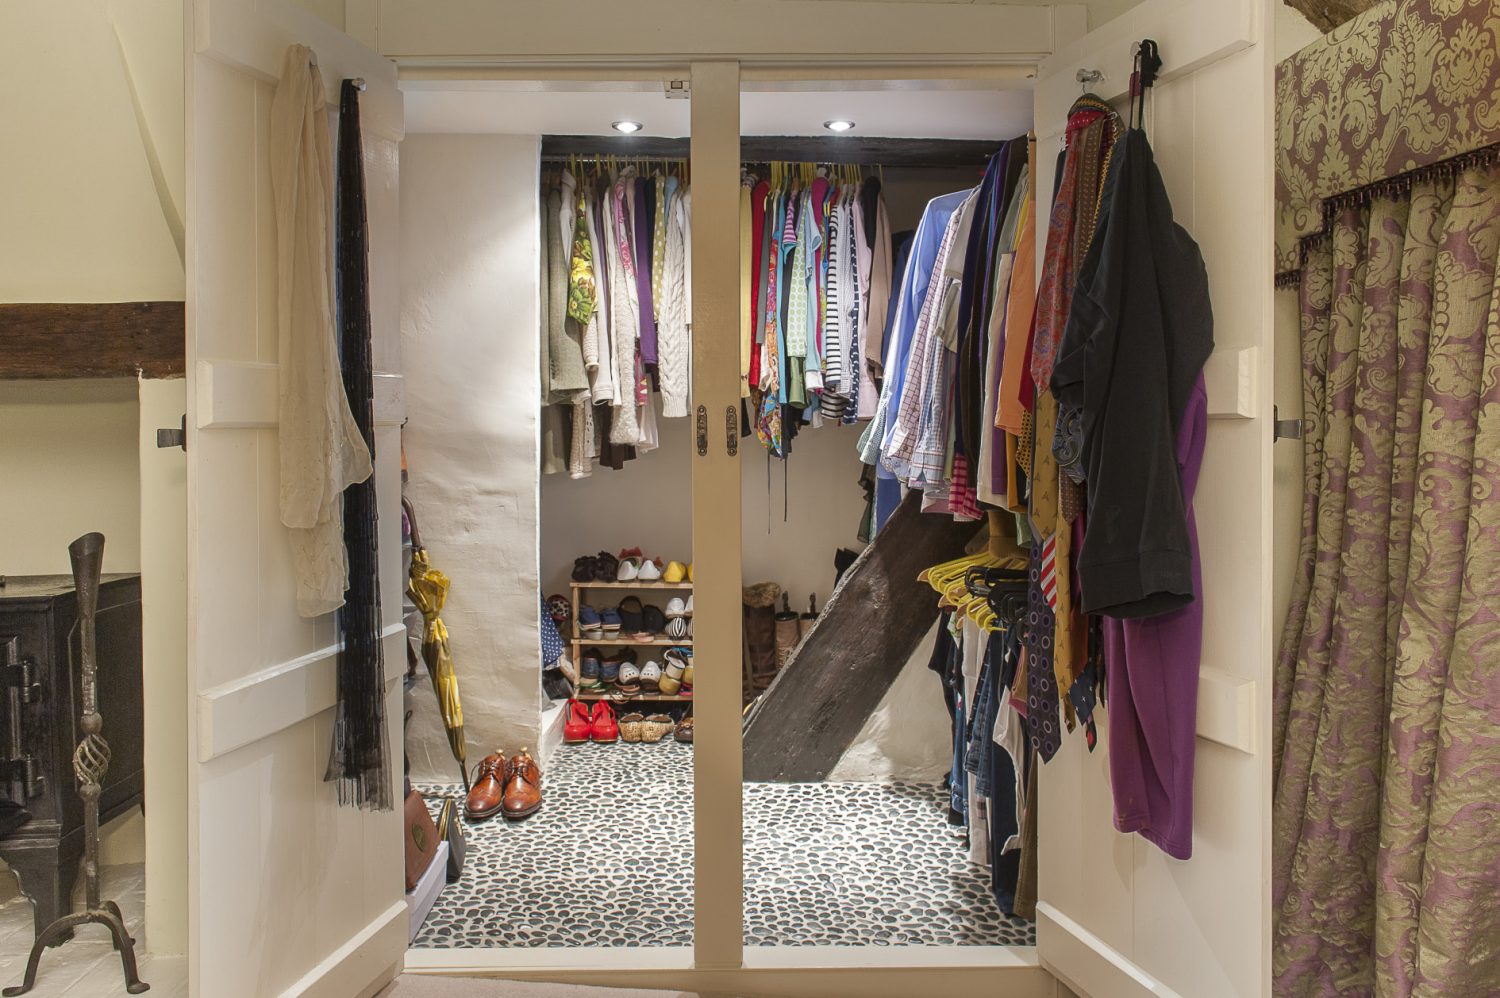 Sarah used a darker version of the pebble flooring in the wet room for the couple’s walk-in wardrobe